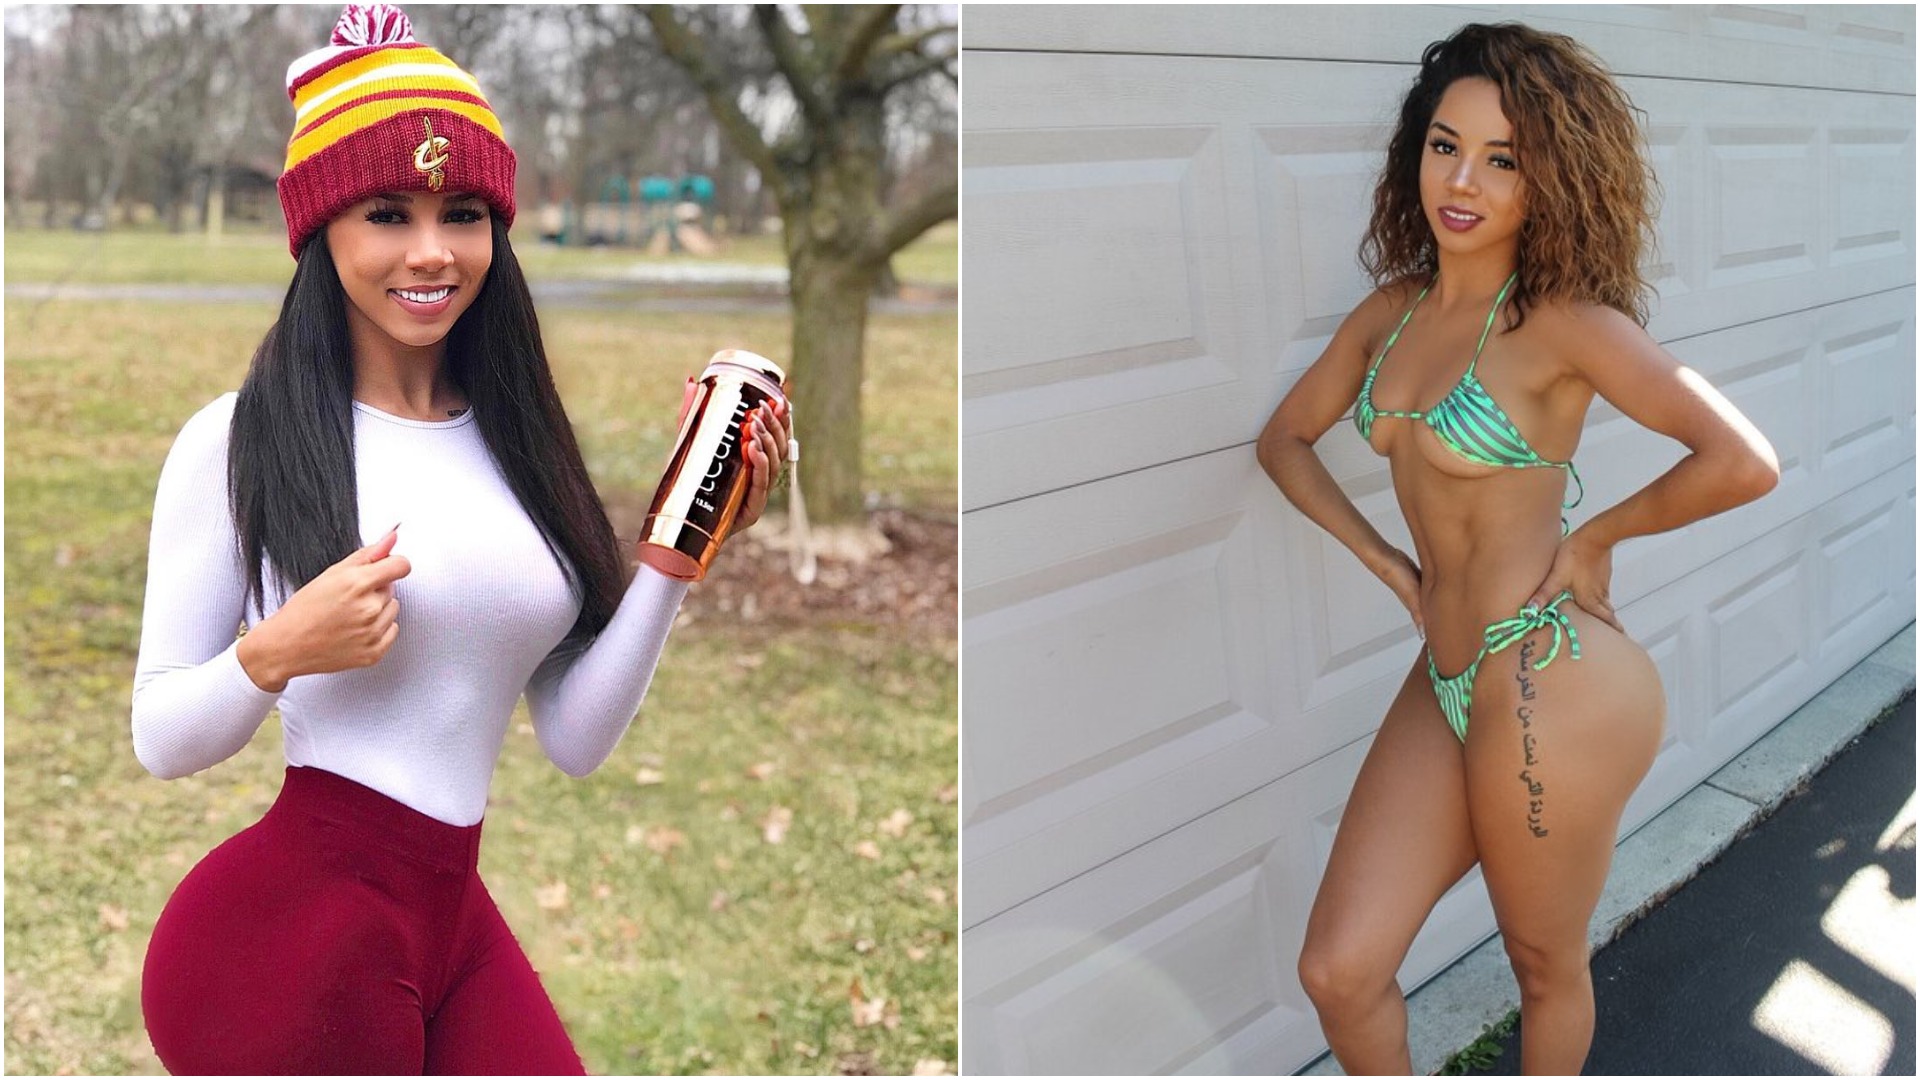 IG Model Brittany Renner Says Her Favorite Team Is Whatever NBA Player She’...